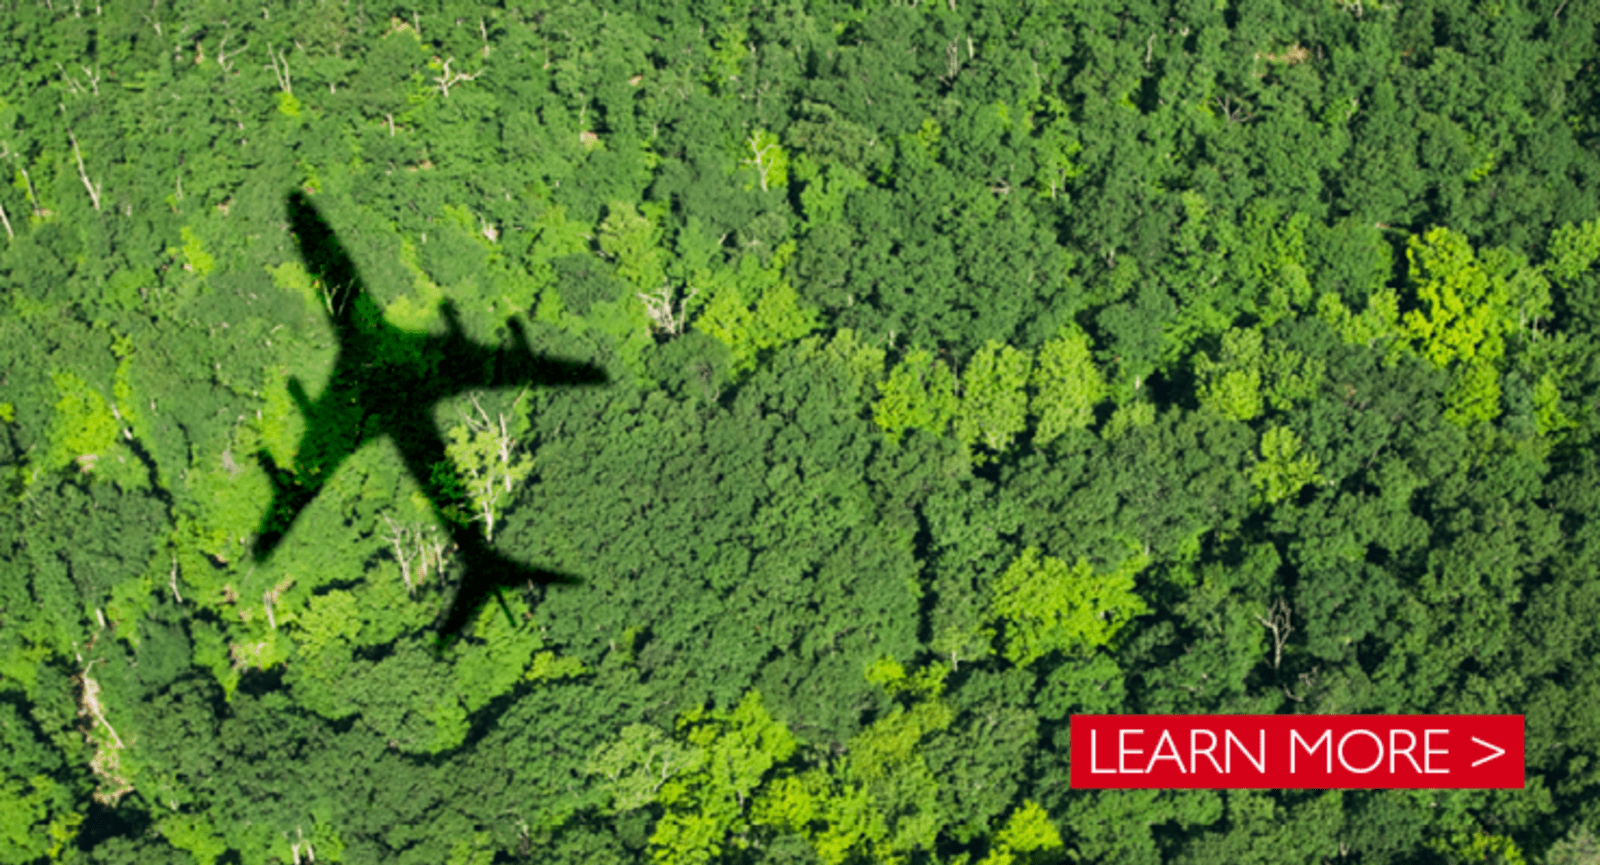 Airplane shadow over a green forest